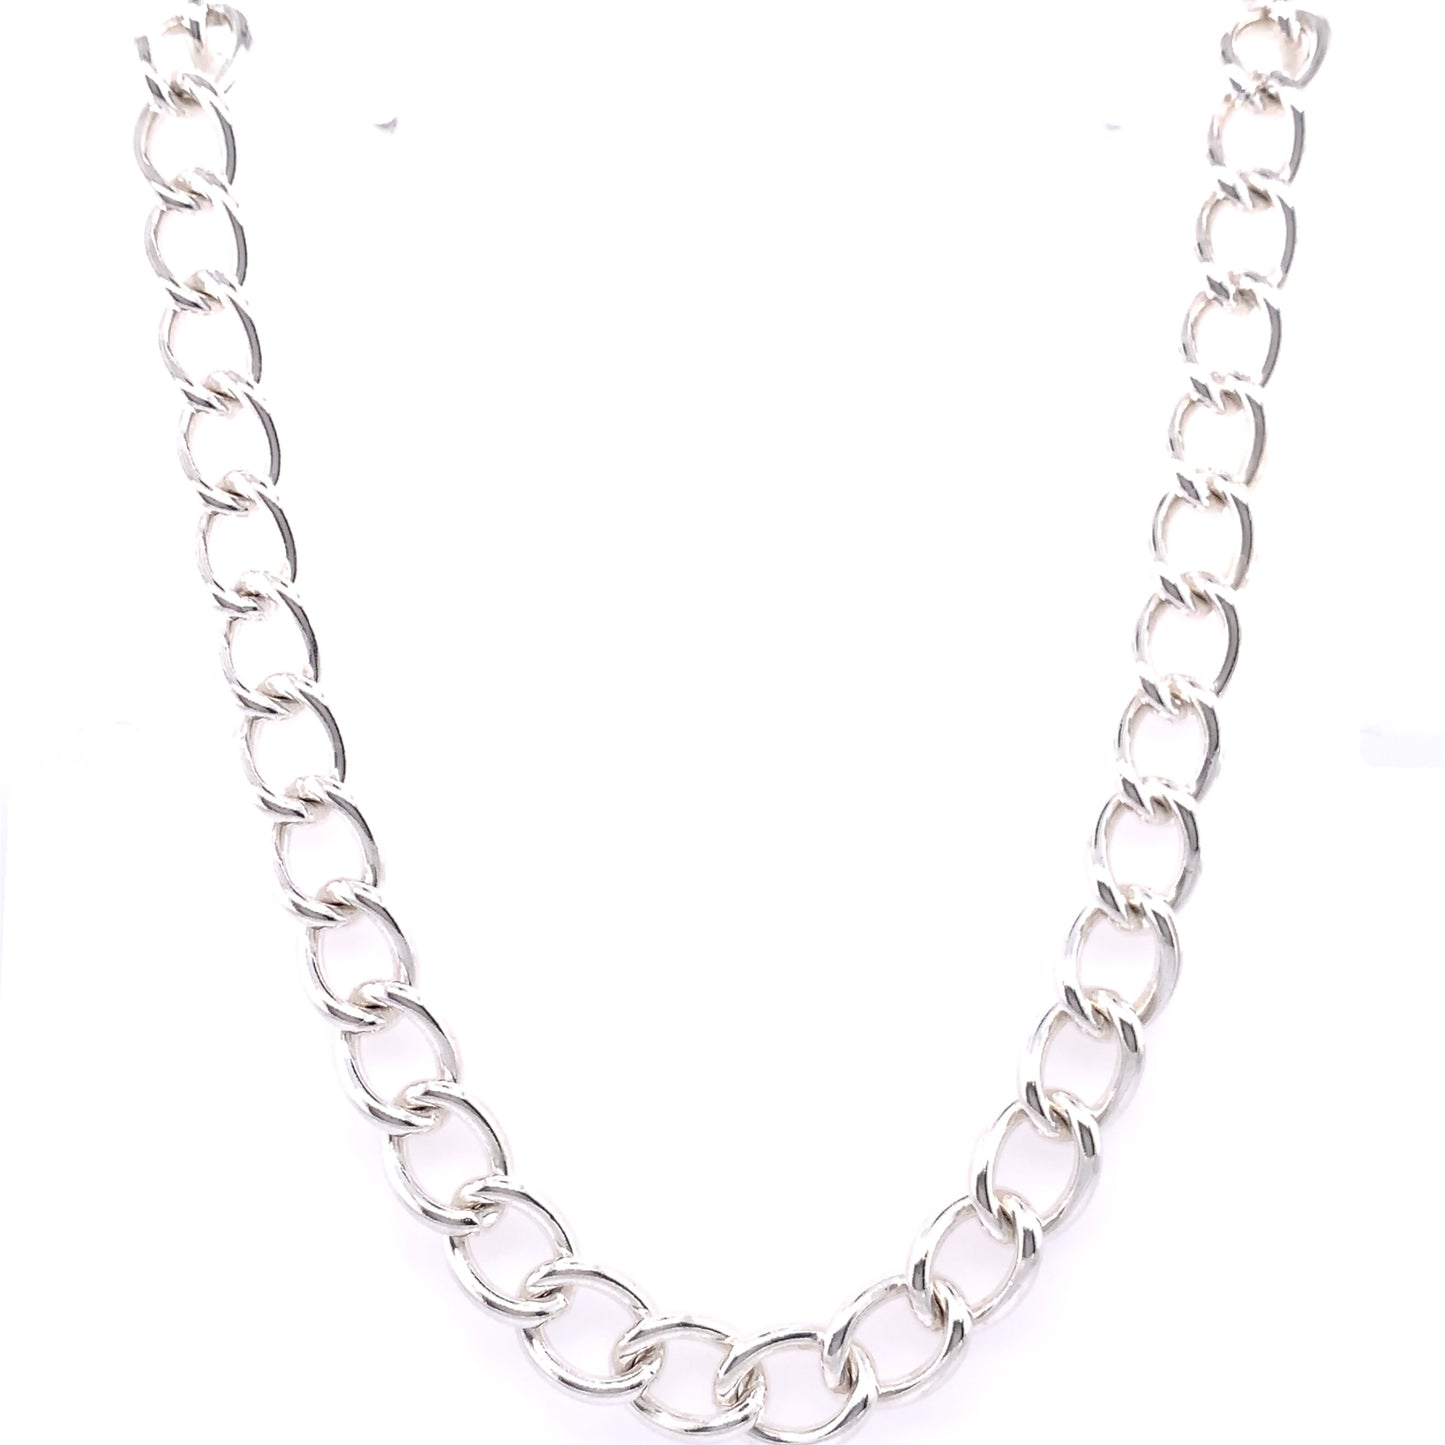 Sterling Silver 18 inch Chunky Open Curb Necklace